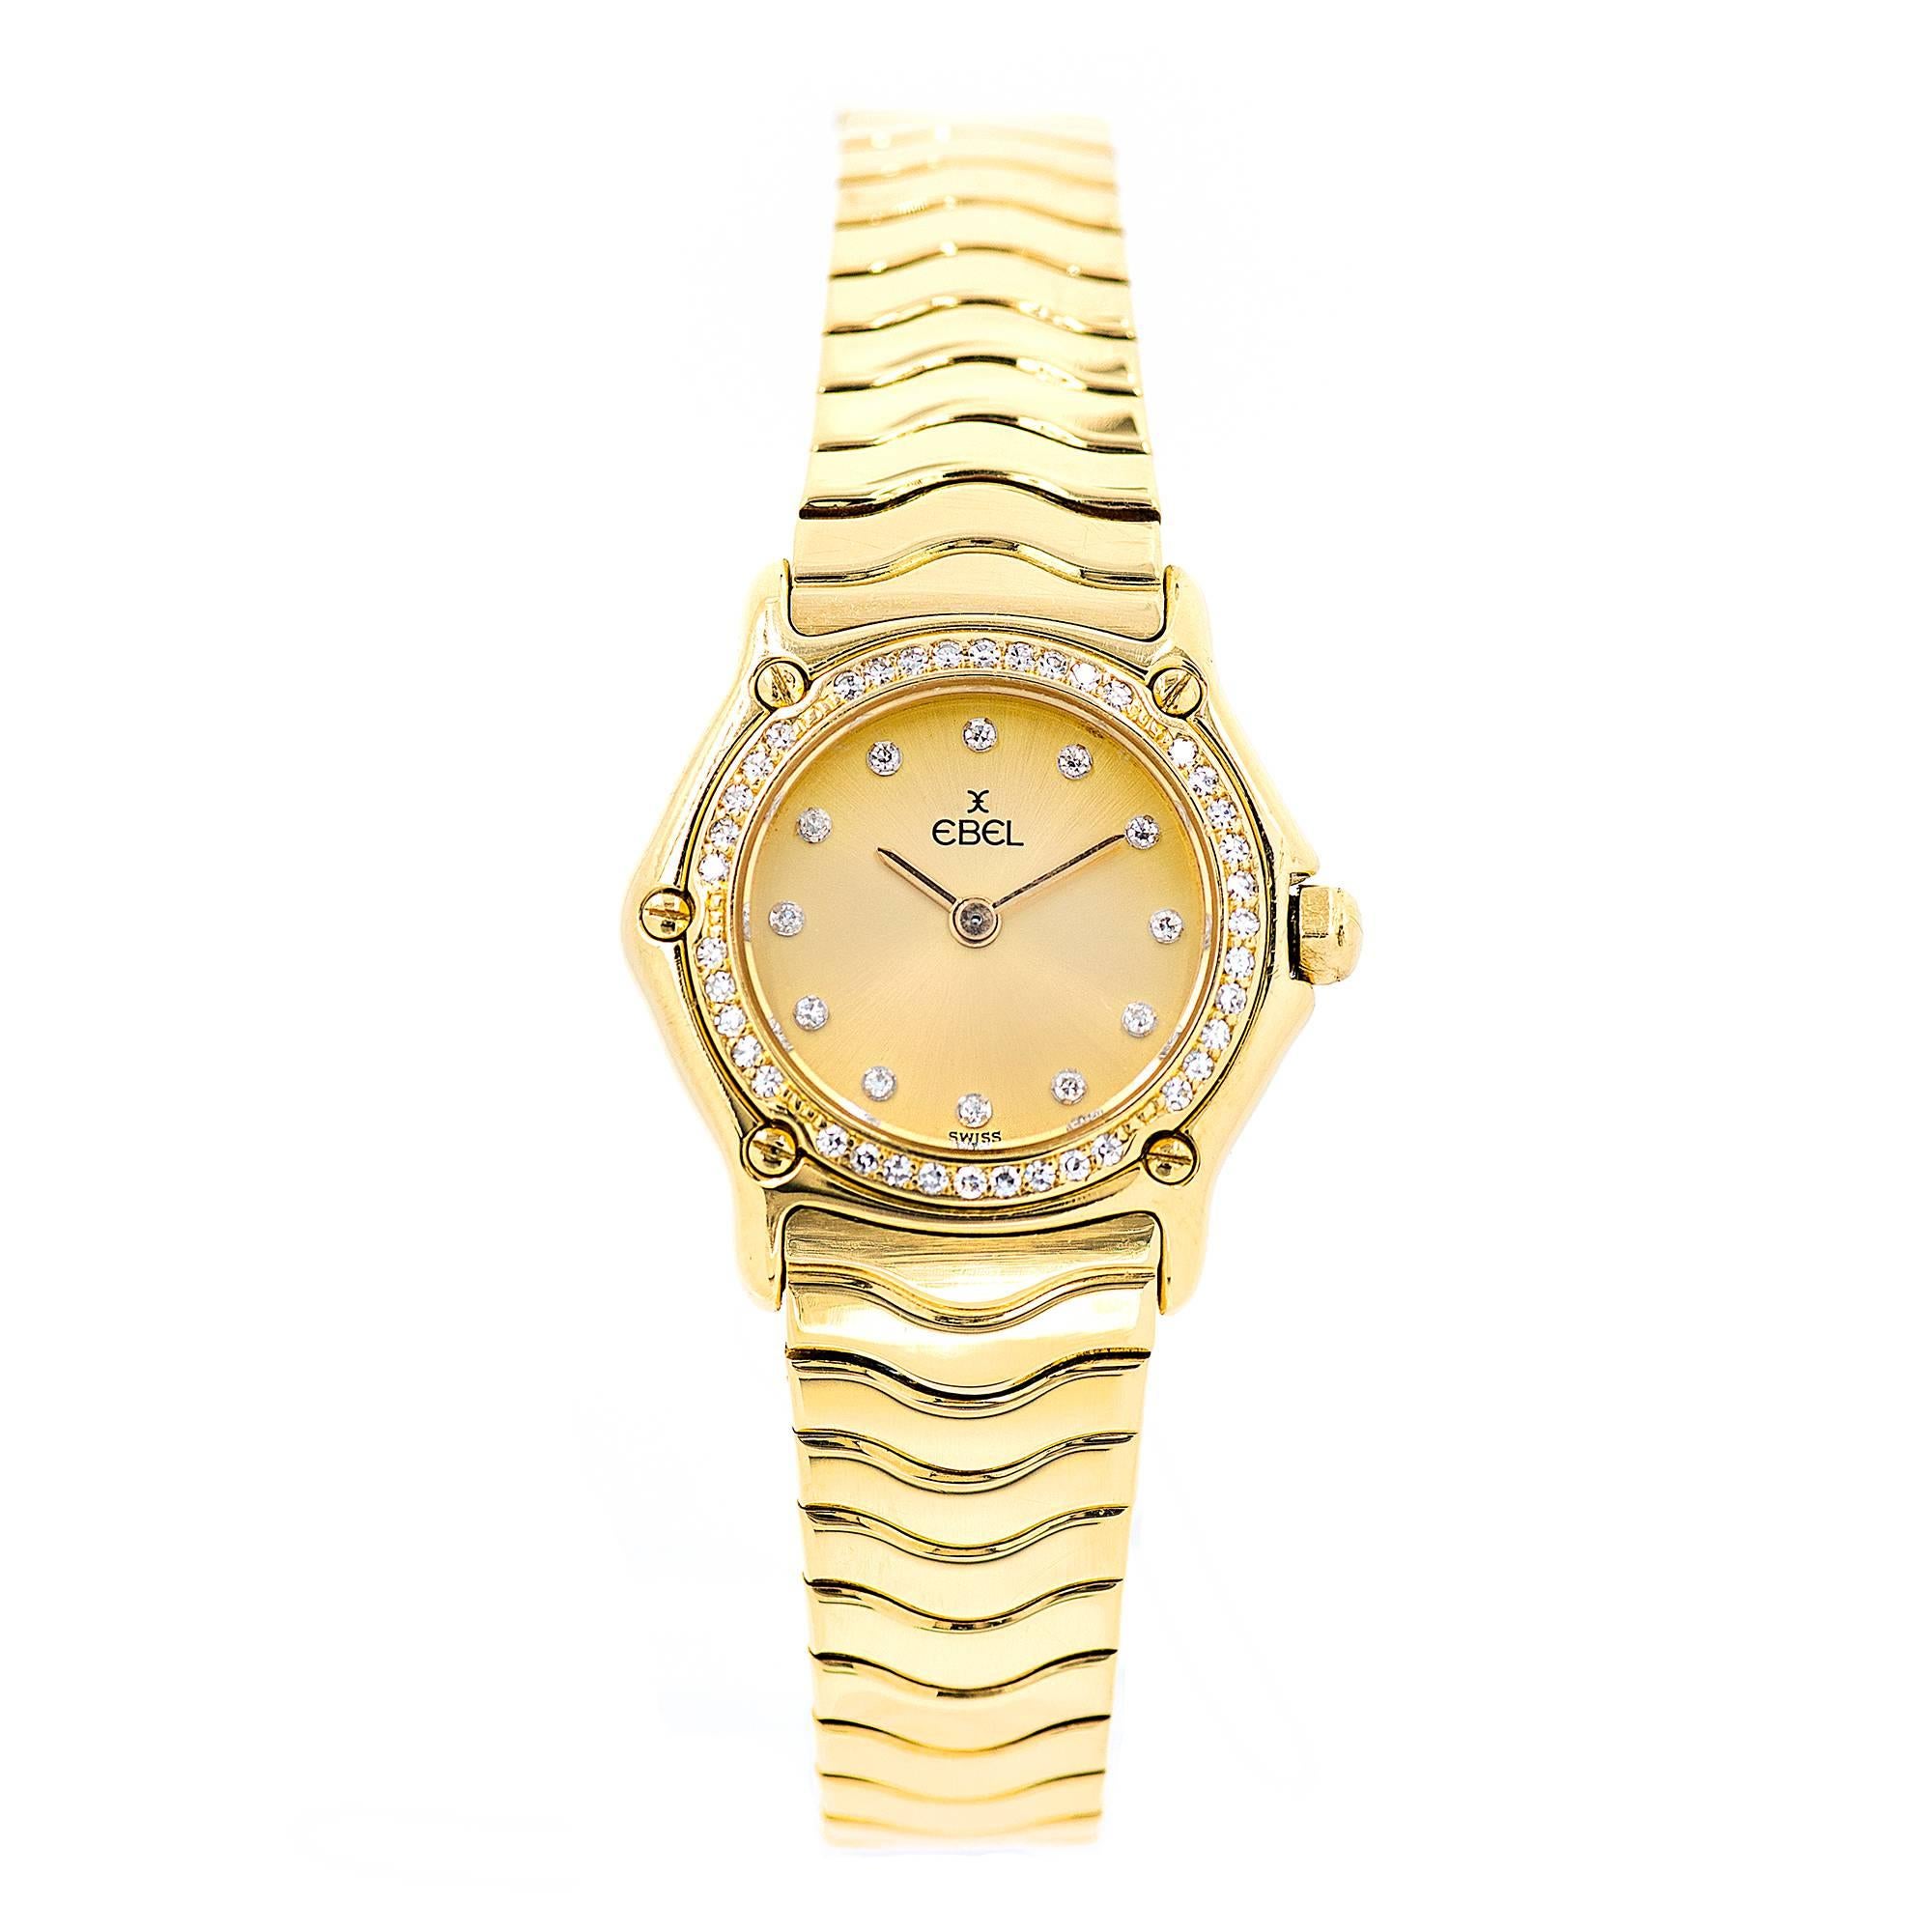 Ladies Ebel Wave wristwatch. All original with solid 18k case and band. Diamond bezel and Diamond dial.

45 diamonds aprox. total weight: .50ct. 
18k yellow gold
Band length: 6 3/8 inches
58.5 grams
Length: 26mm
Width: 23mm
Band width at case: